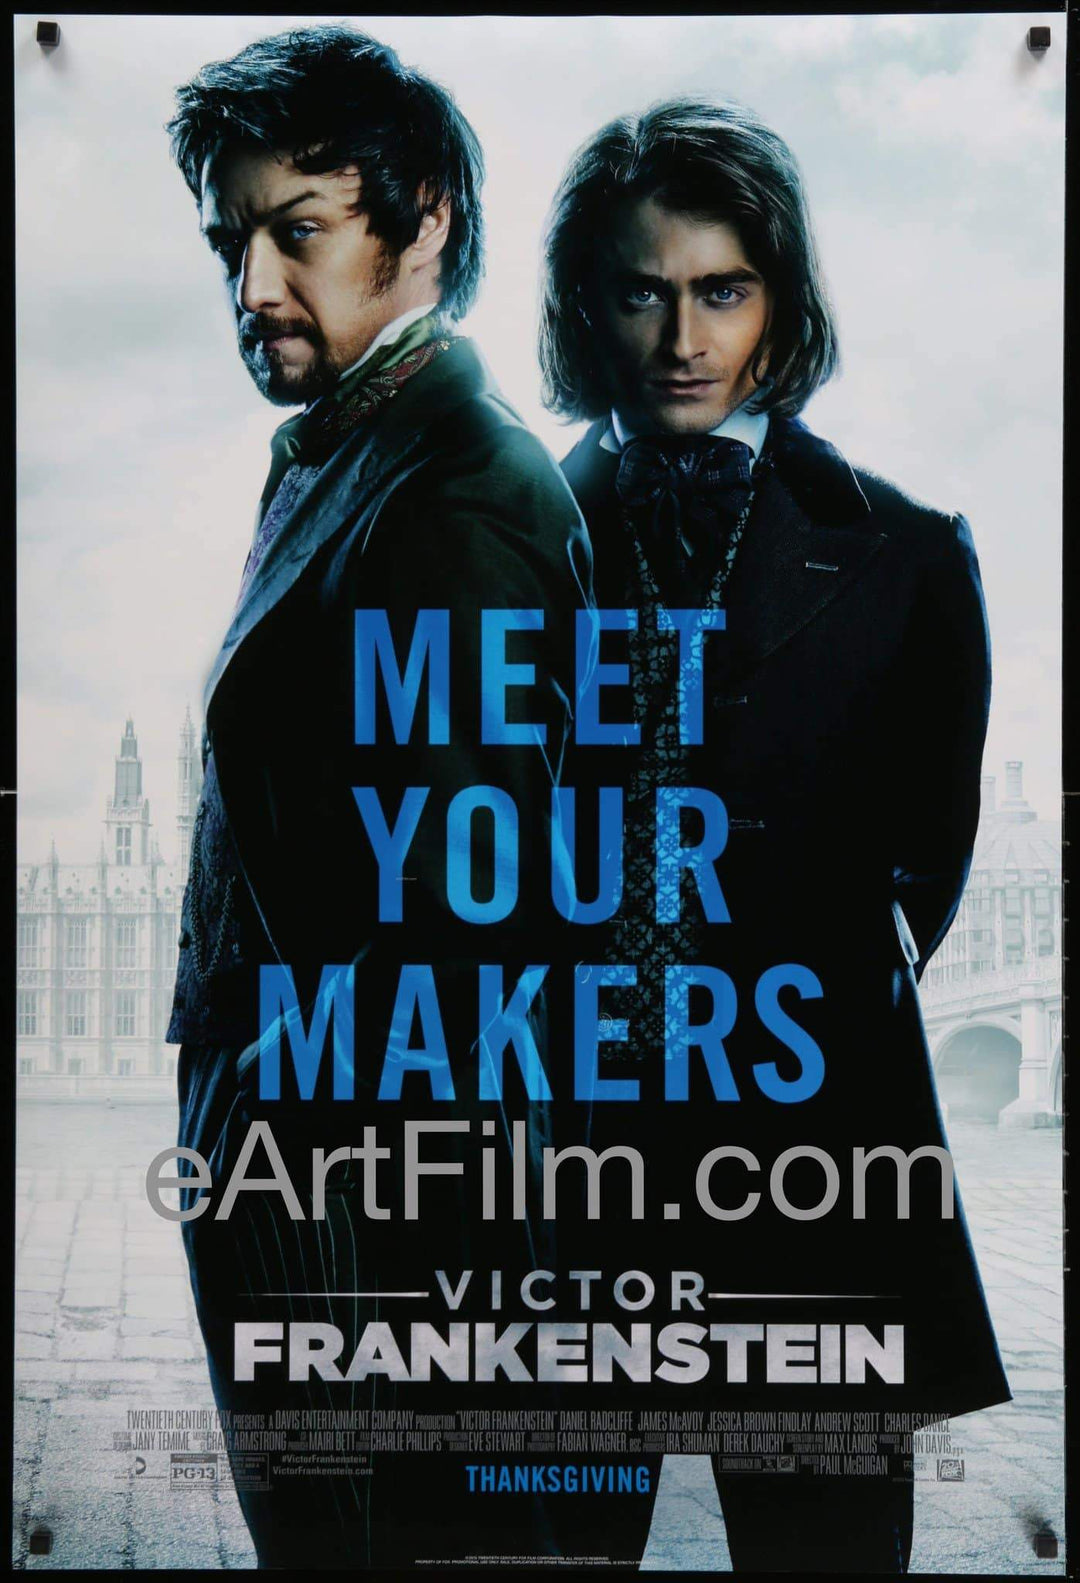 eArtFilm.com U.S Unfolded Style A Advance Double Sided One Sheet (27"x40")-Original-Vintage-Movie-Poster Victor Frankenstein 2015 27x40 One Sheet United States